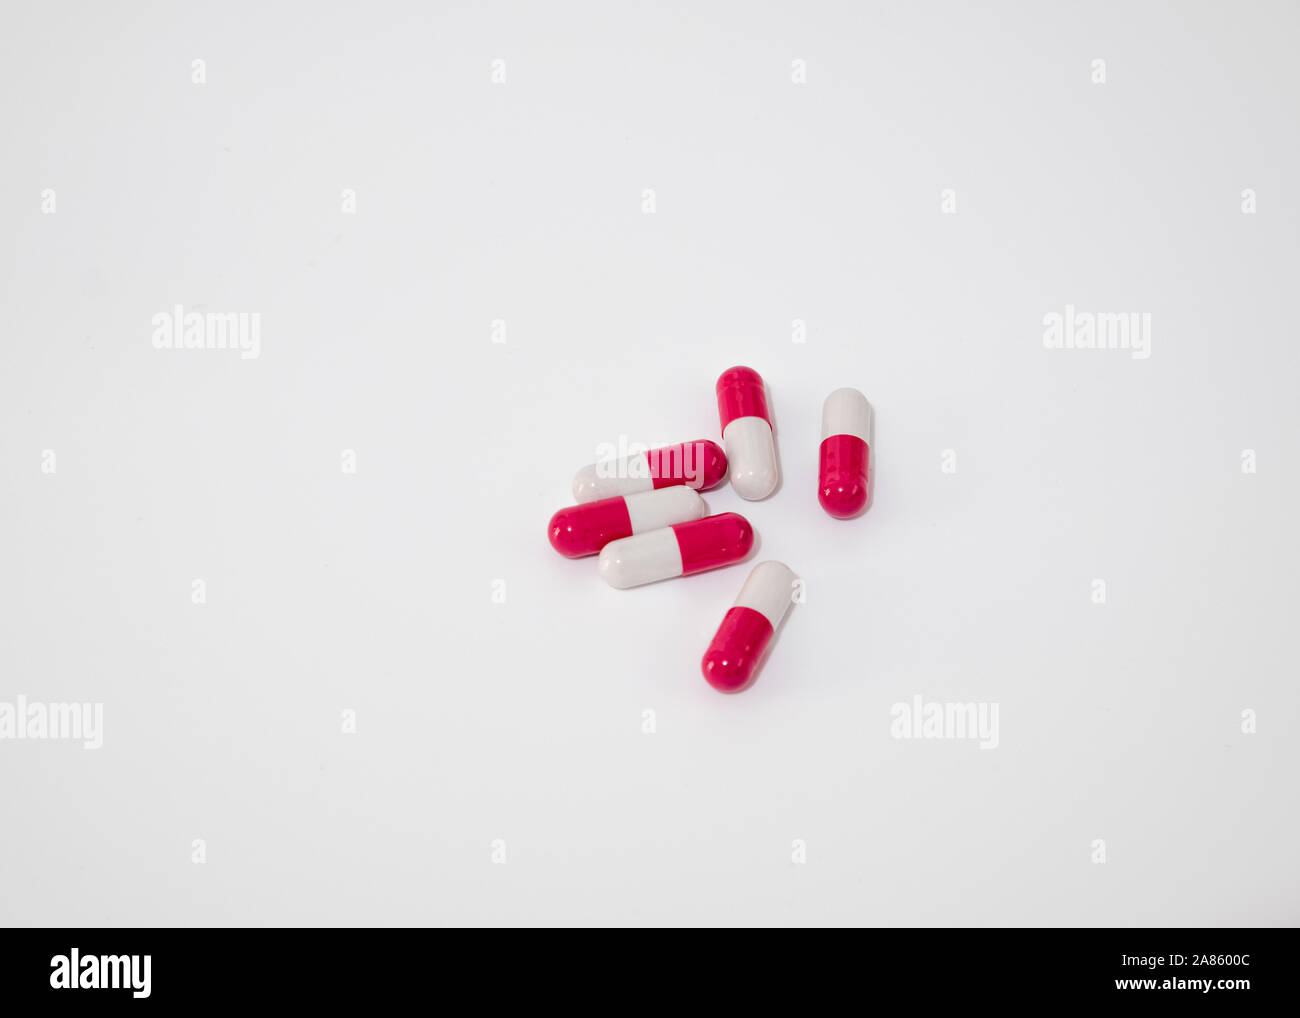 Many white and red piled capsules photographed against a white background. Stock Photo